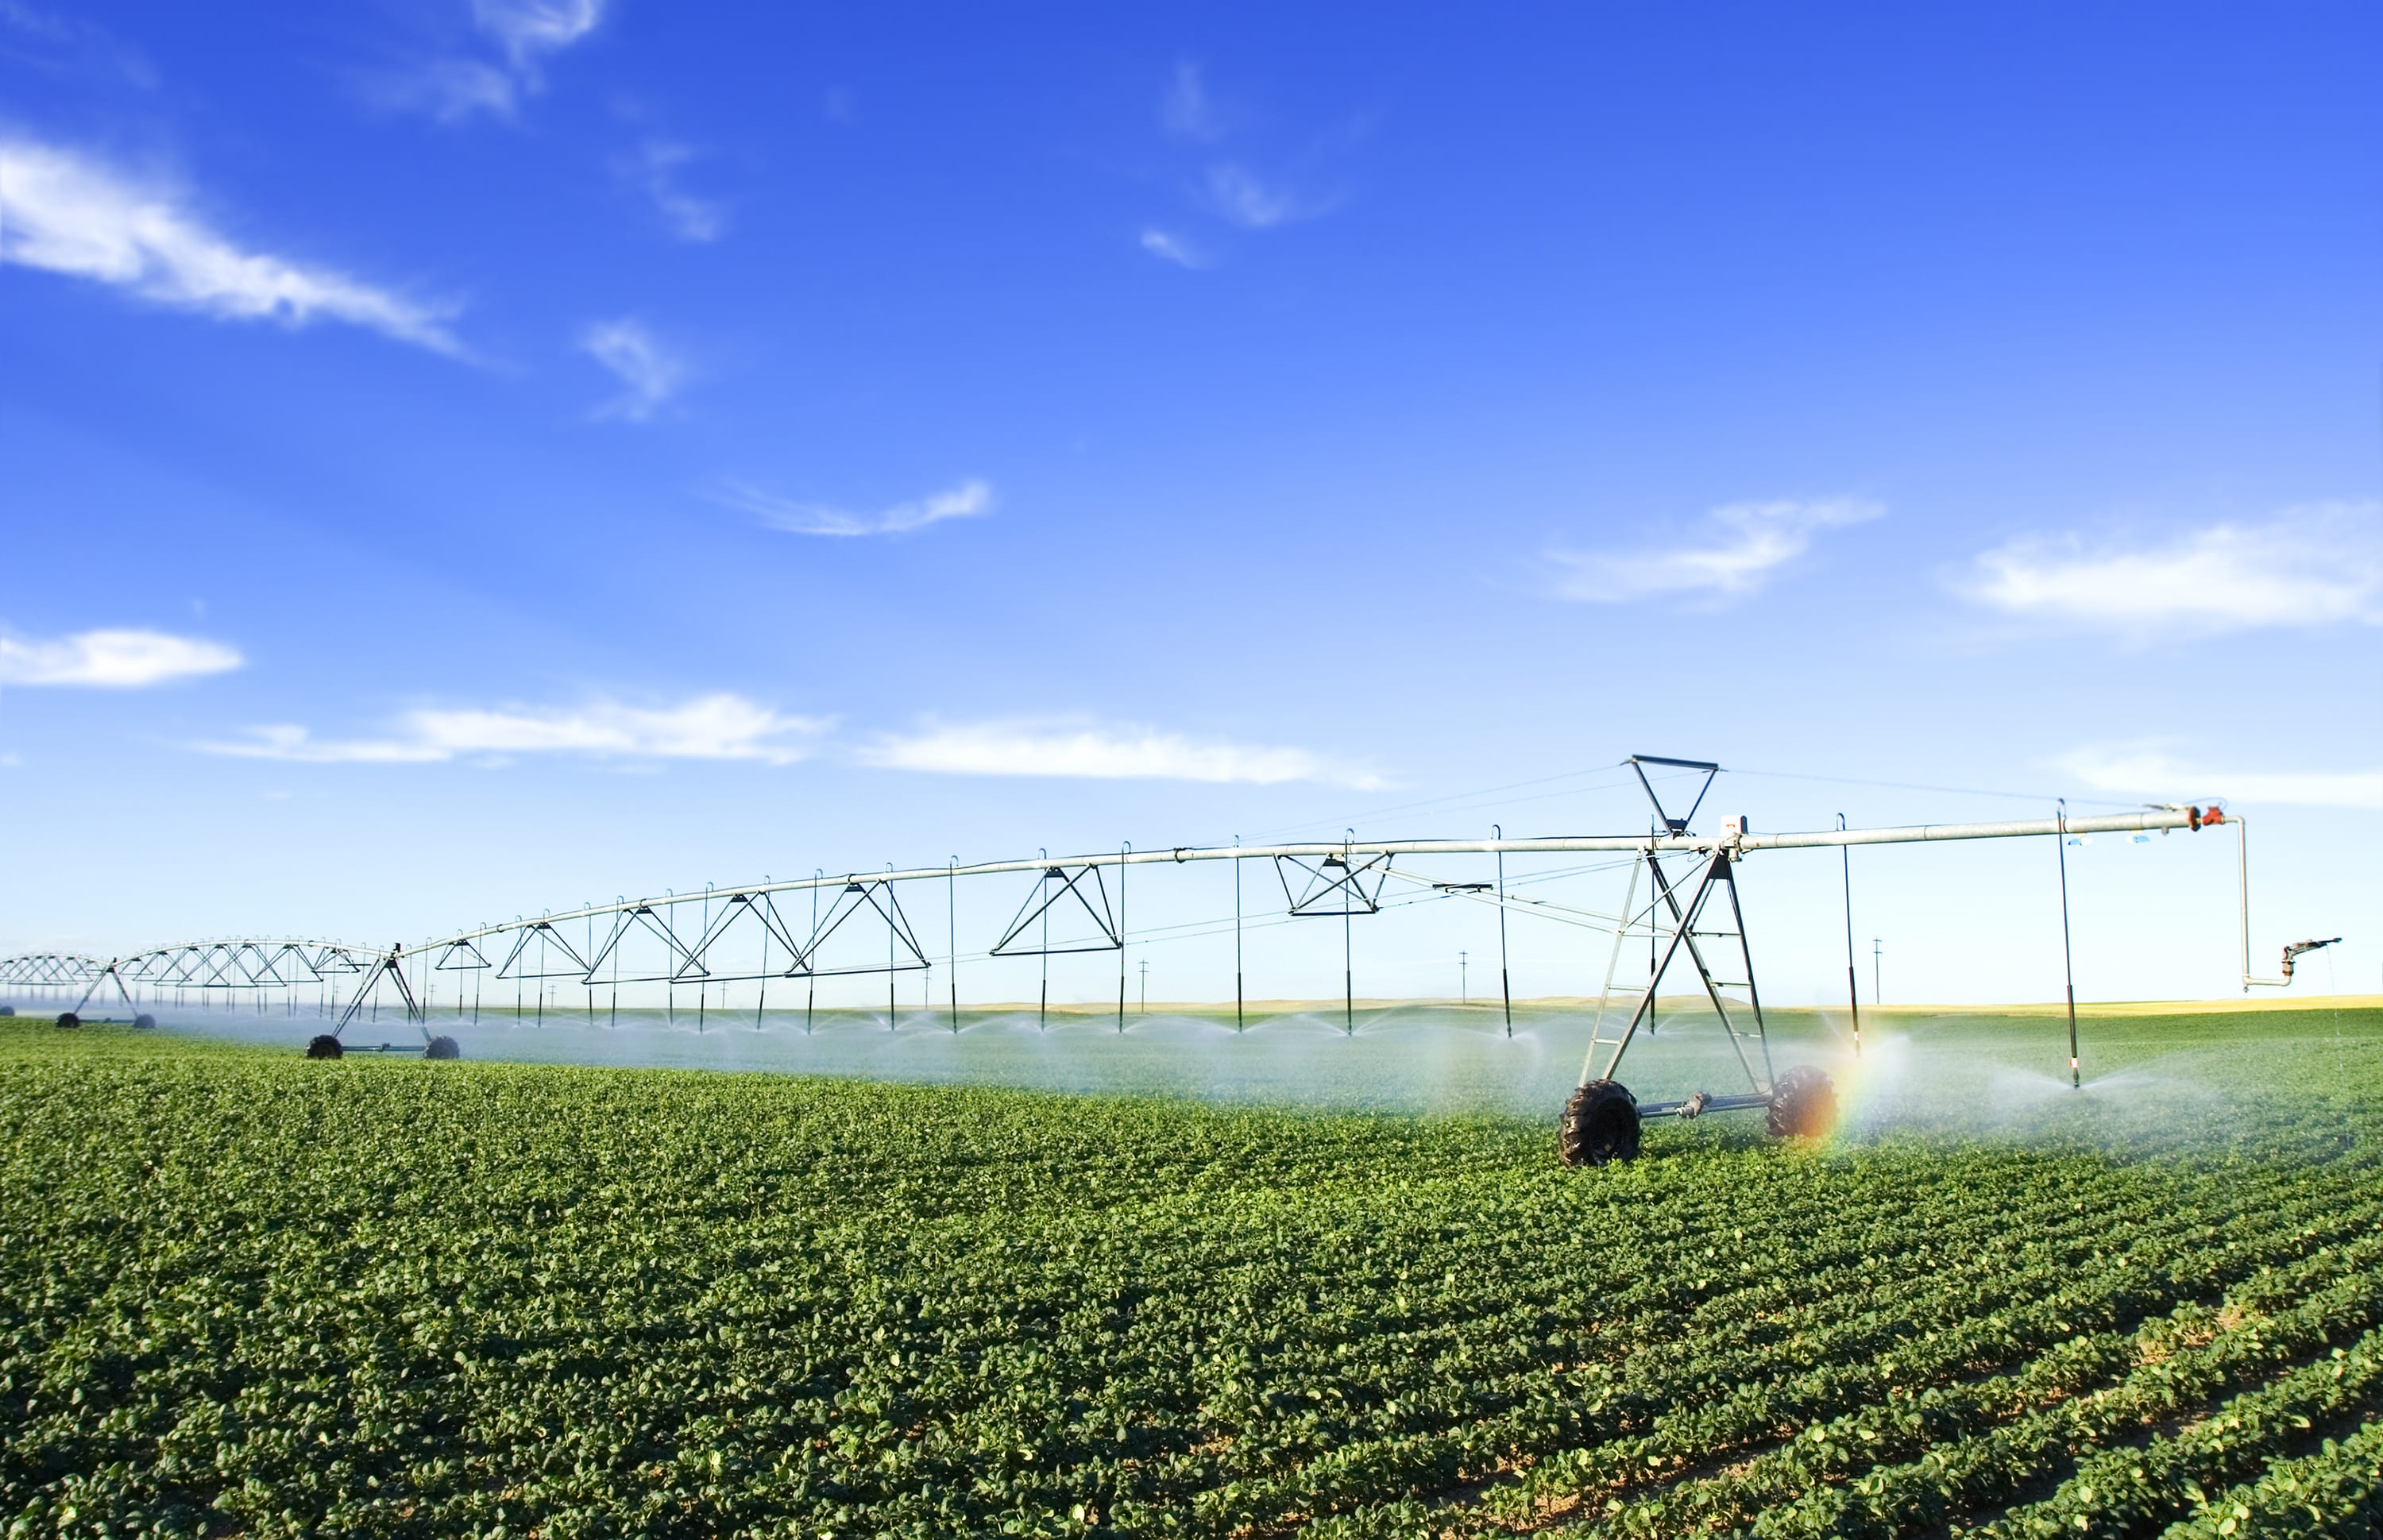 Farmers Reap the Benefits of Connected Technology in the Field